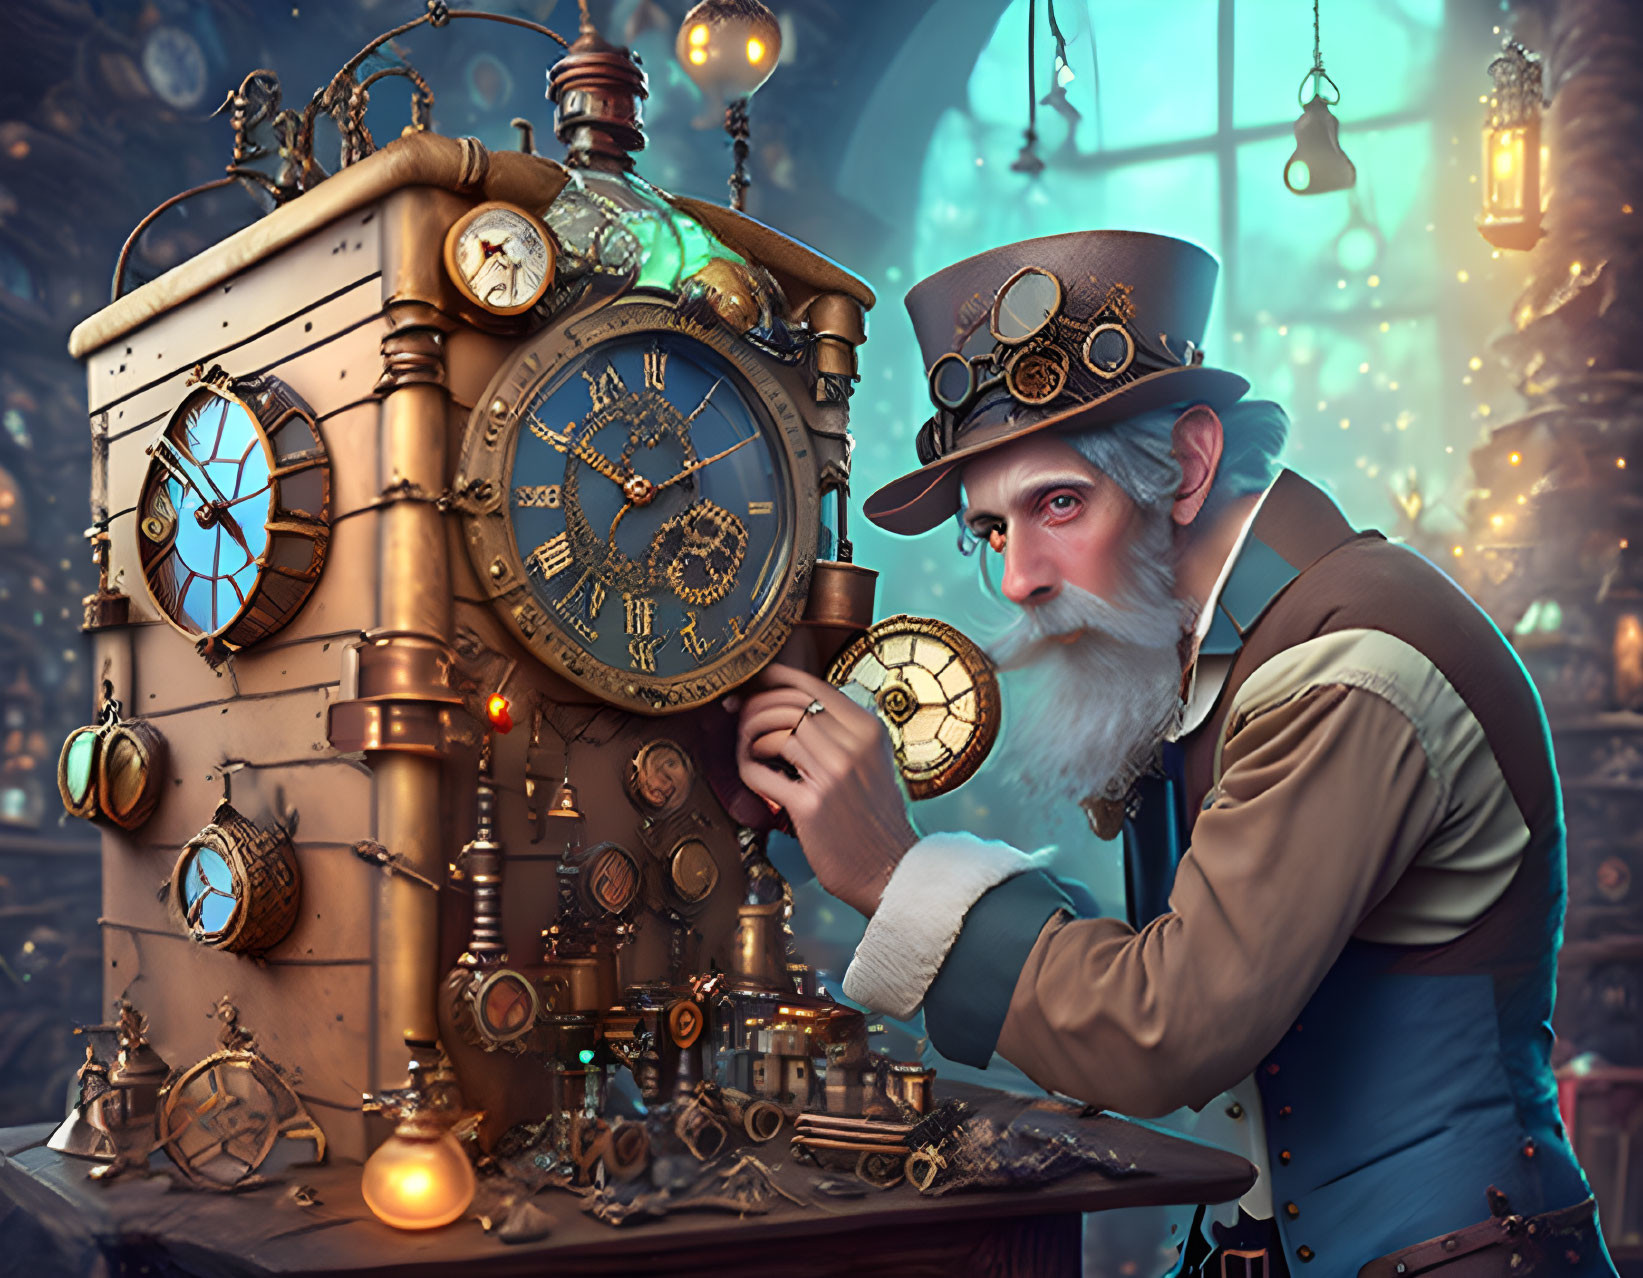 Bearded man in steampunk outfit with goggles next to clockwork machine in vintage lantern-lit